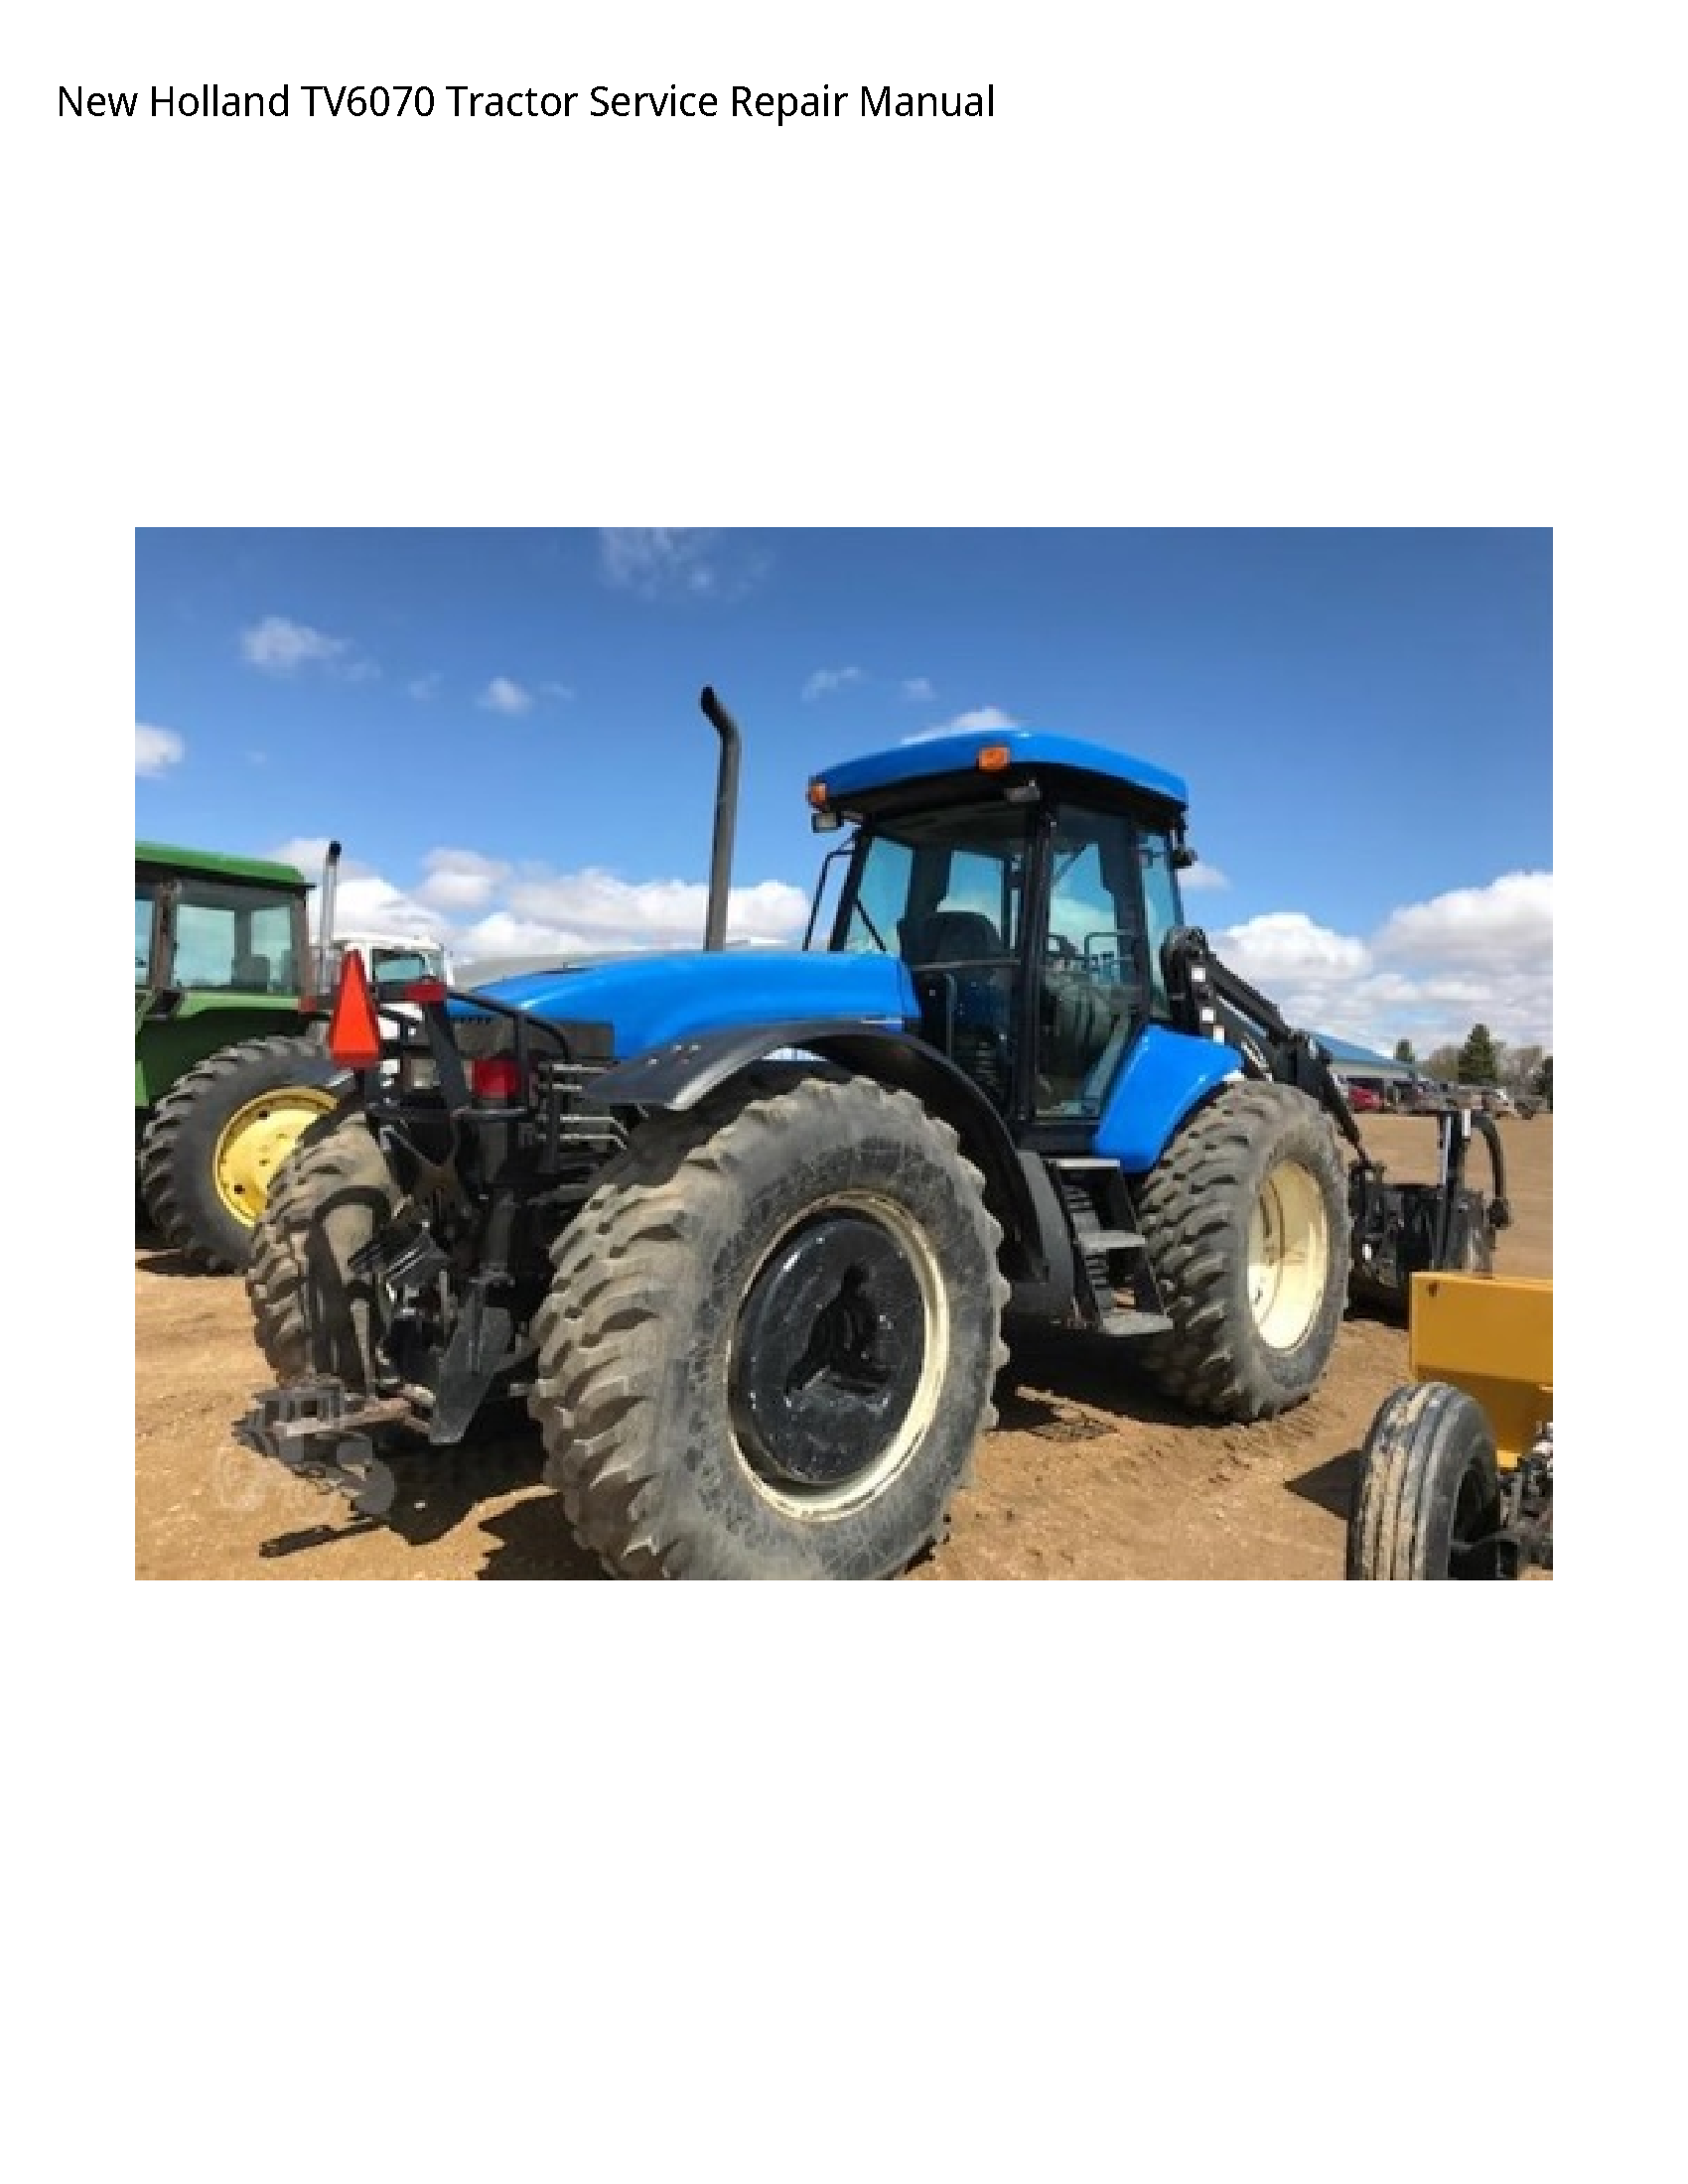 New Holland TV6070 Tractor manual